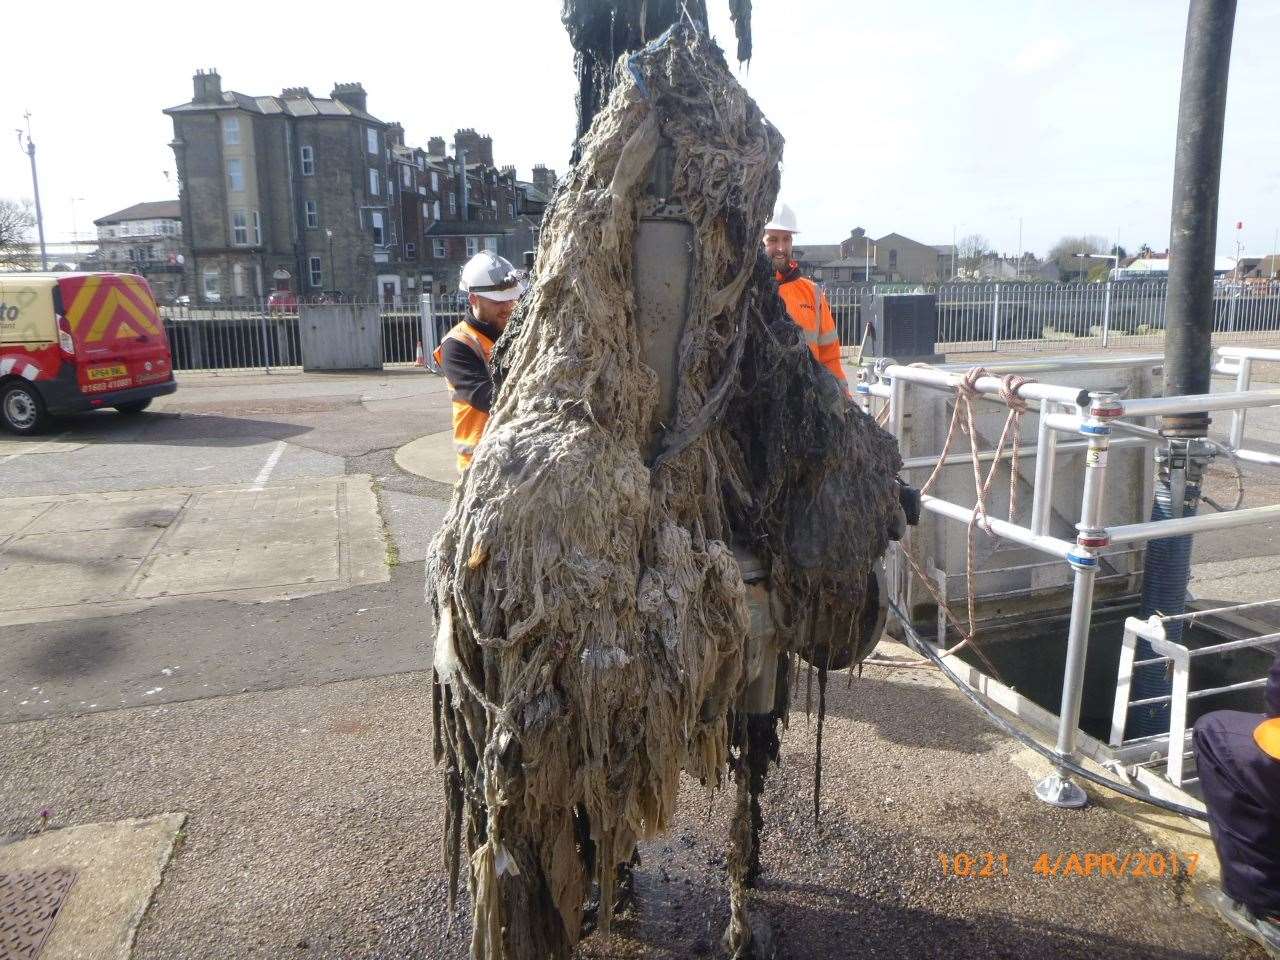 A wet wipe 'monster' found in Lowerstoft. Picture: Anglian Water